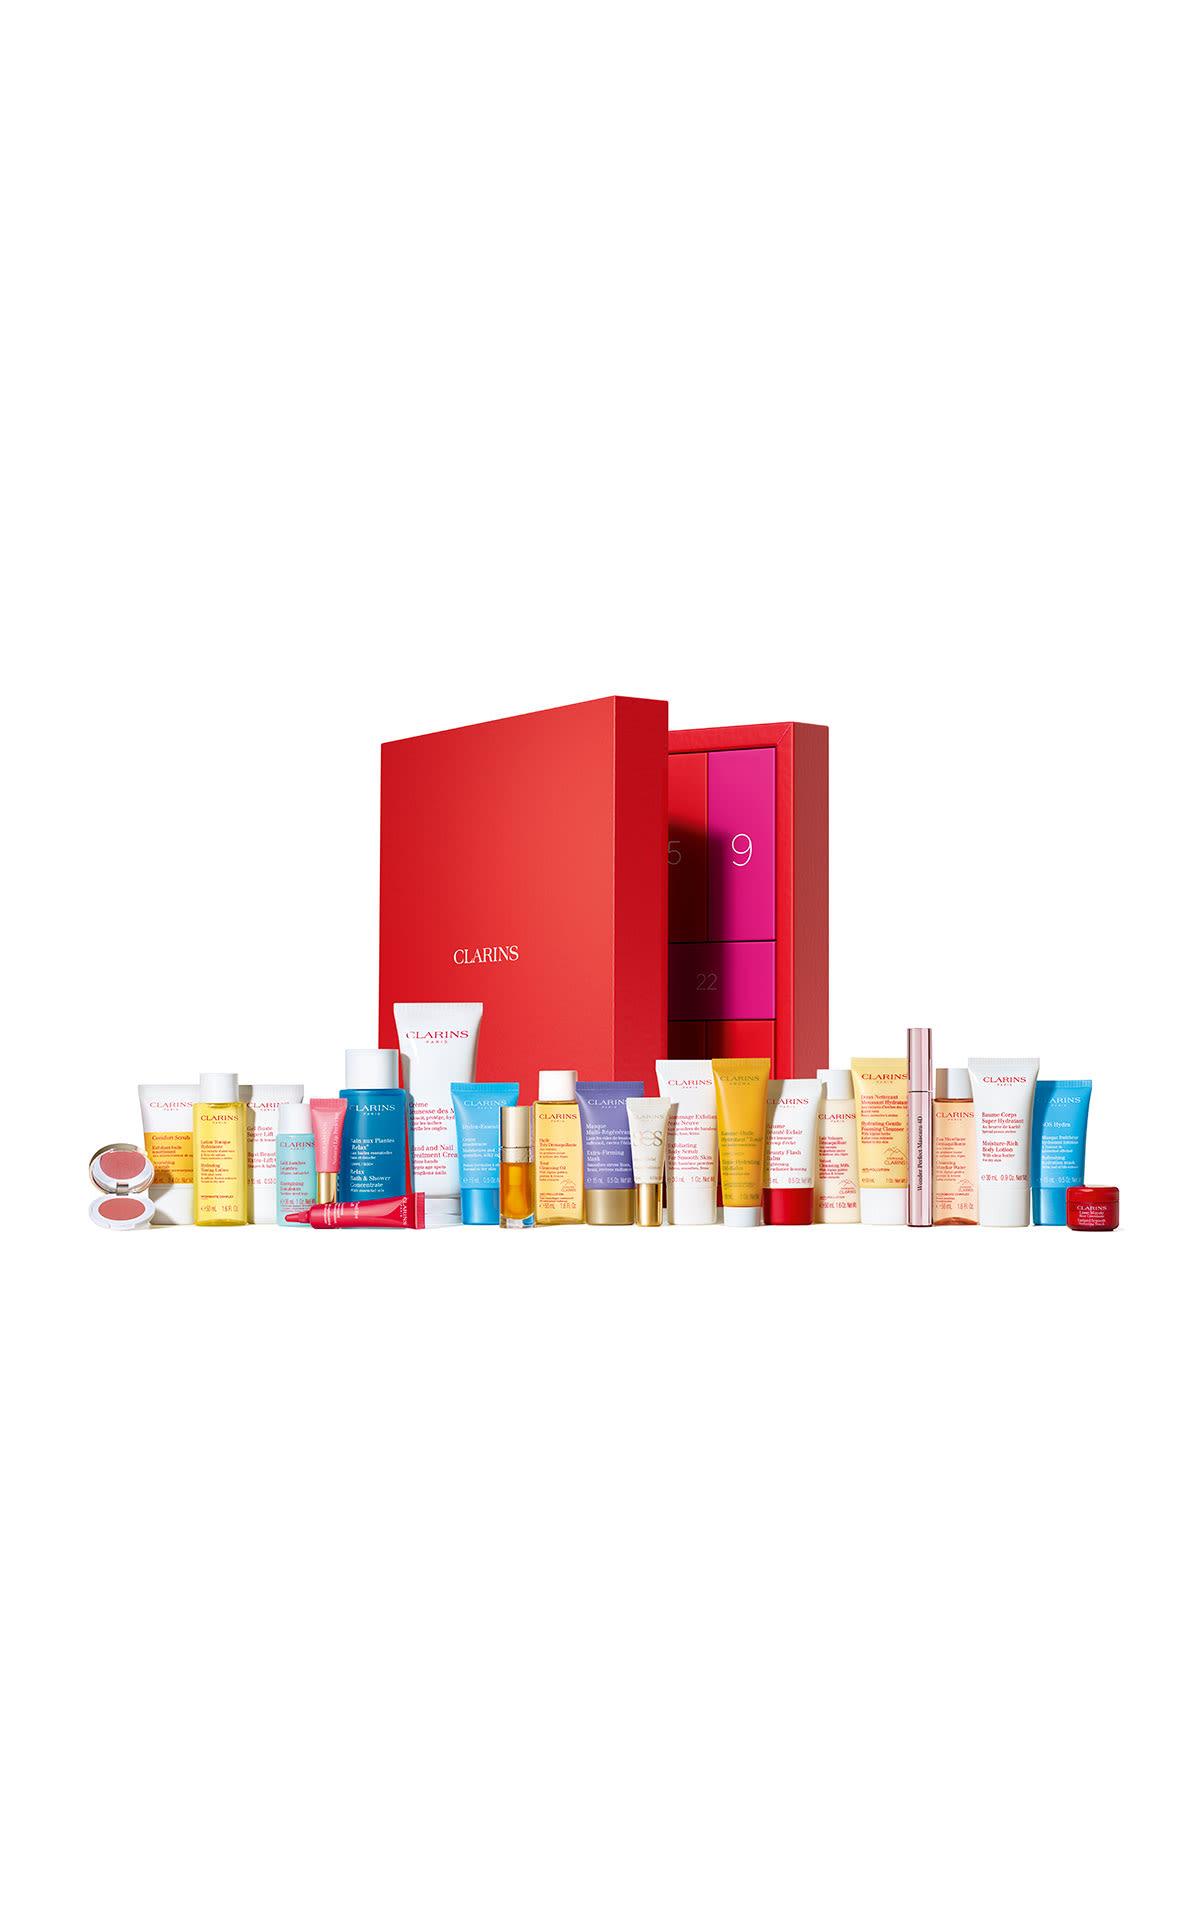 Advent calendar of 24 boxes clarins